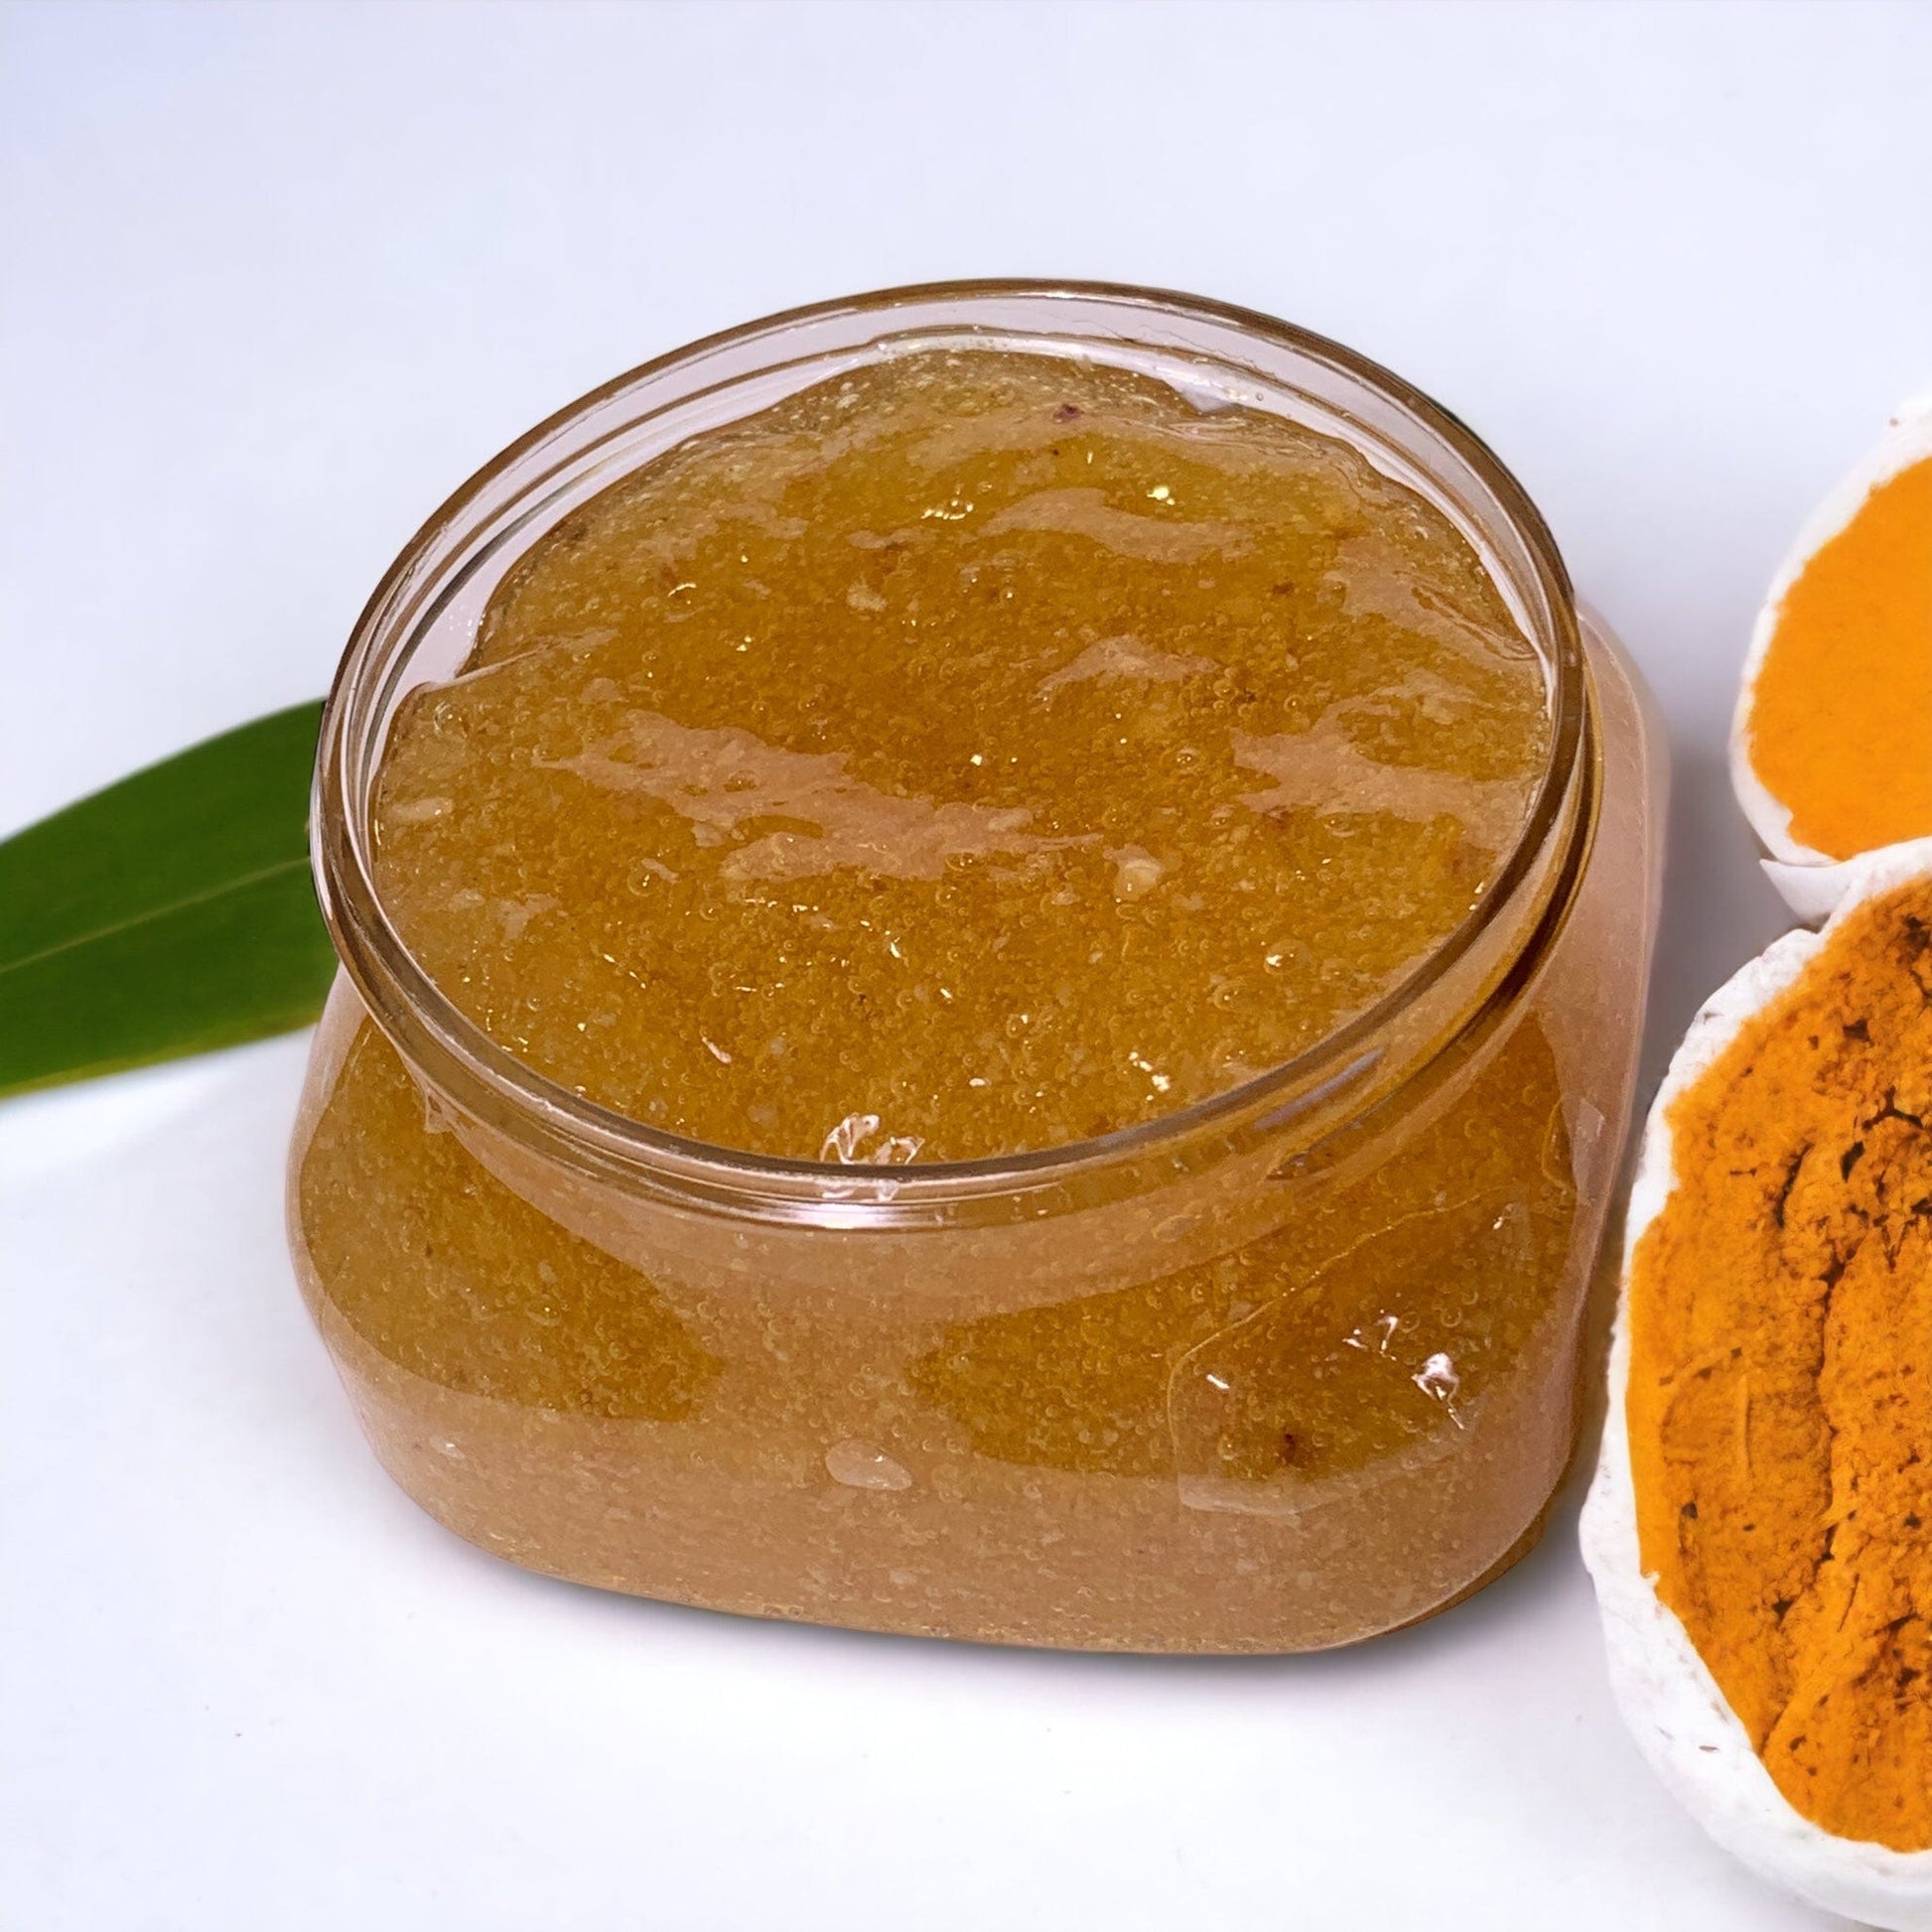 Underarm Brightening Jelly Mask with Licorice, Turmeric and Willow Bark - Seli Han Skincare 